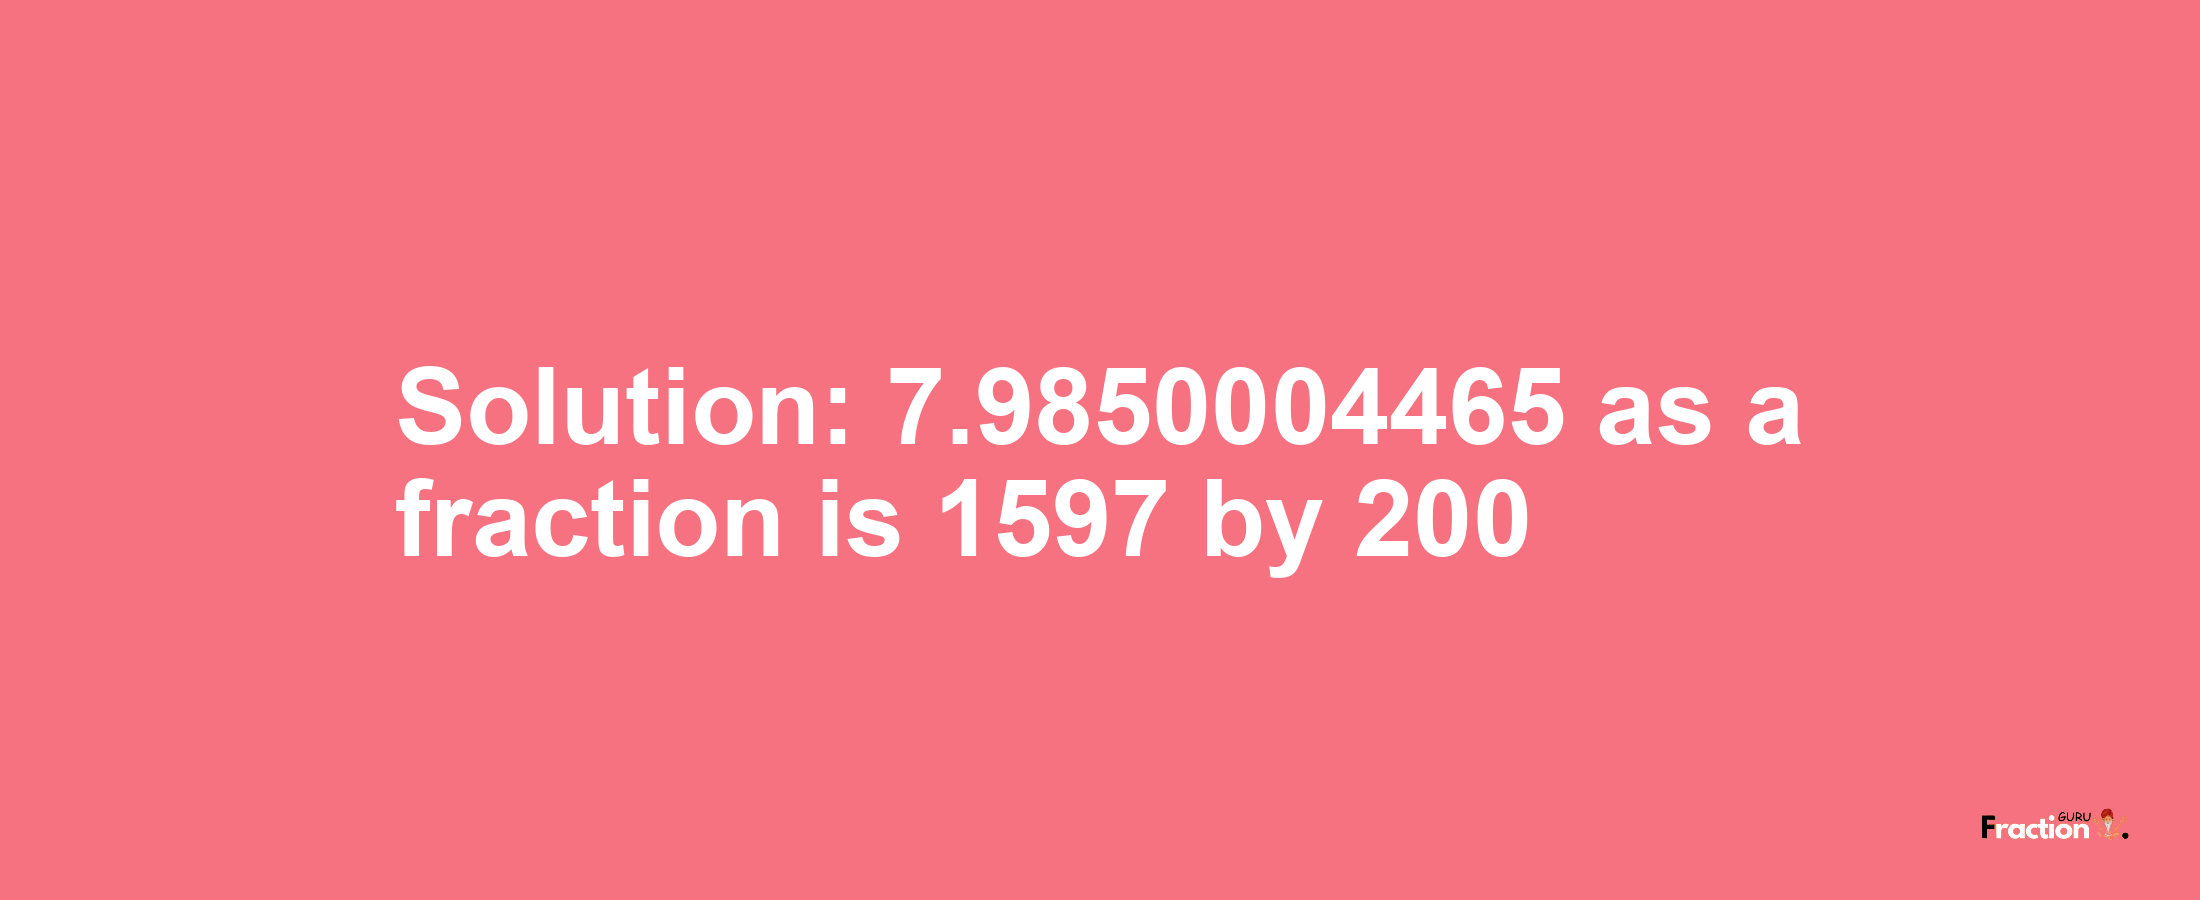 Solution:7.9850004465 as a fraction is 1597/200